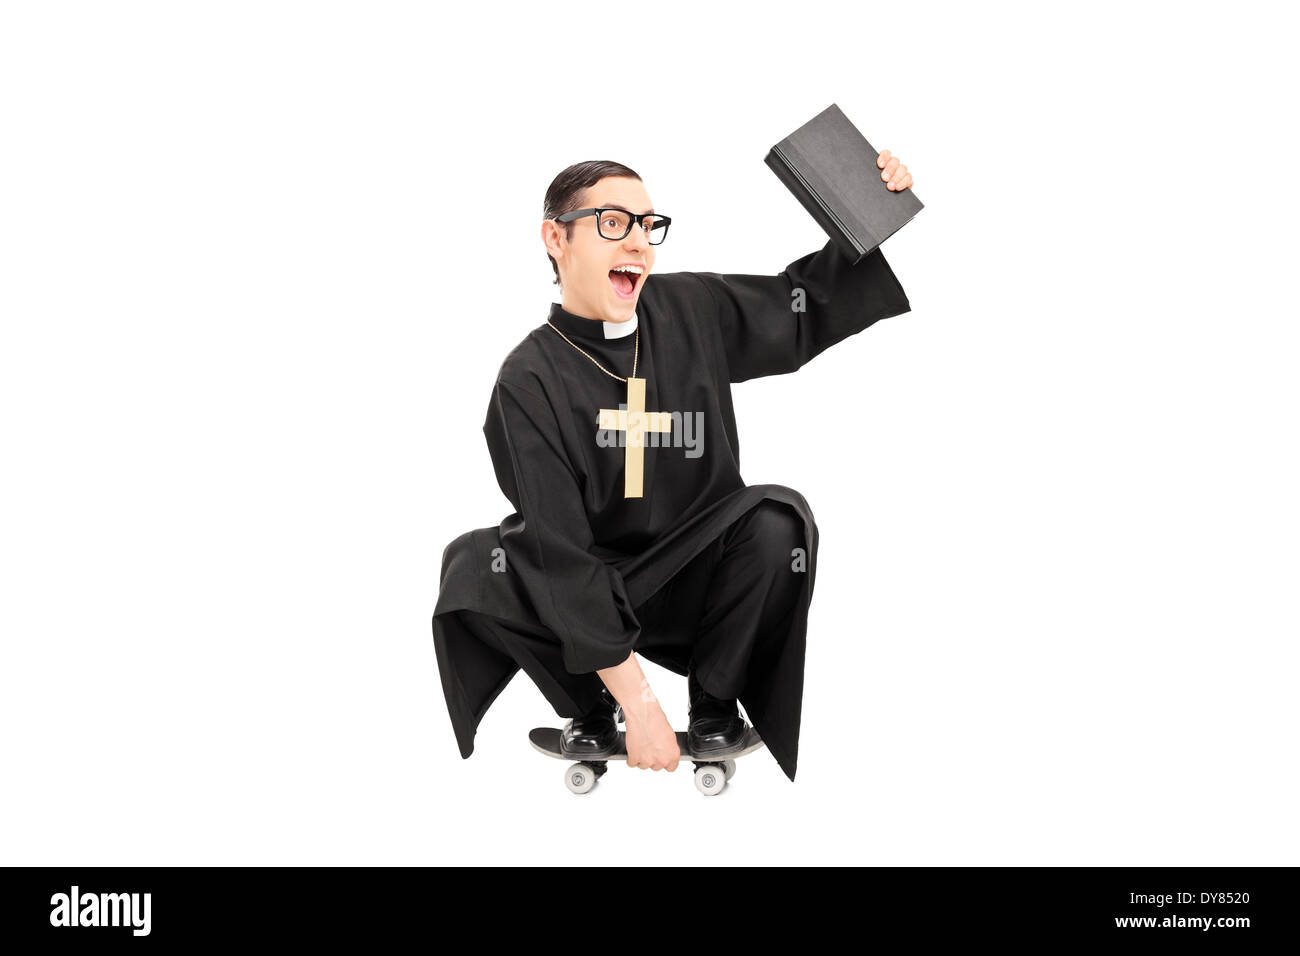 Male priest riding a small skateboard Stock Photo